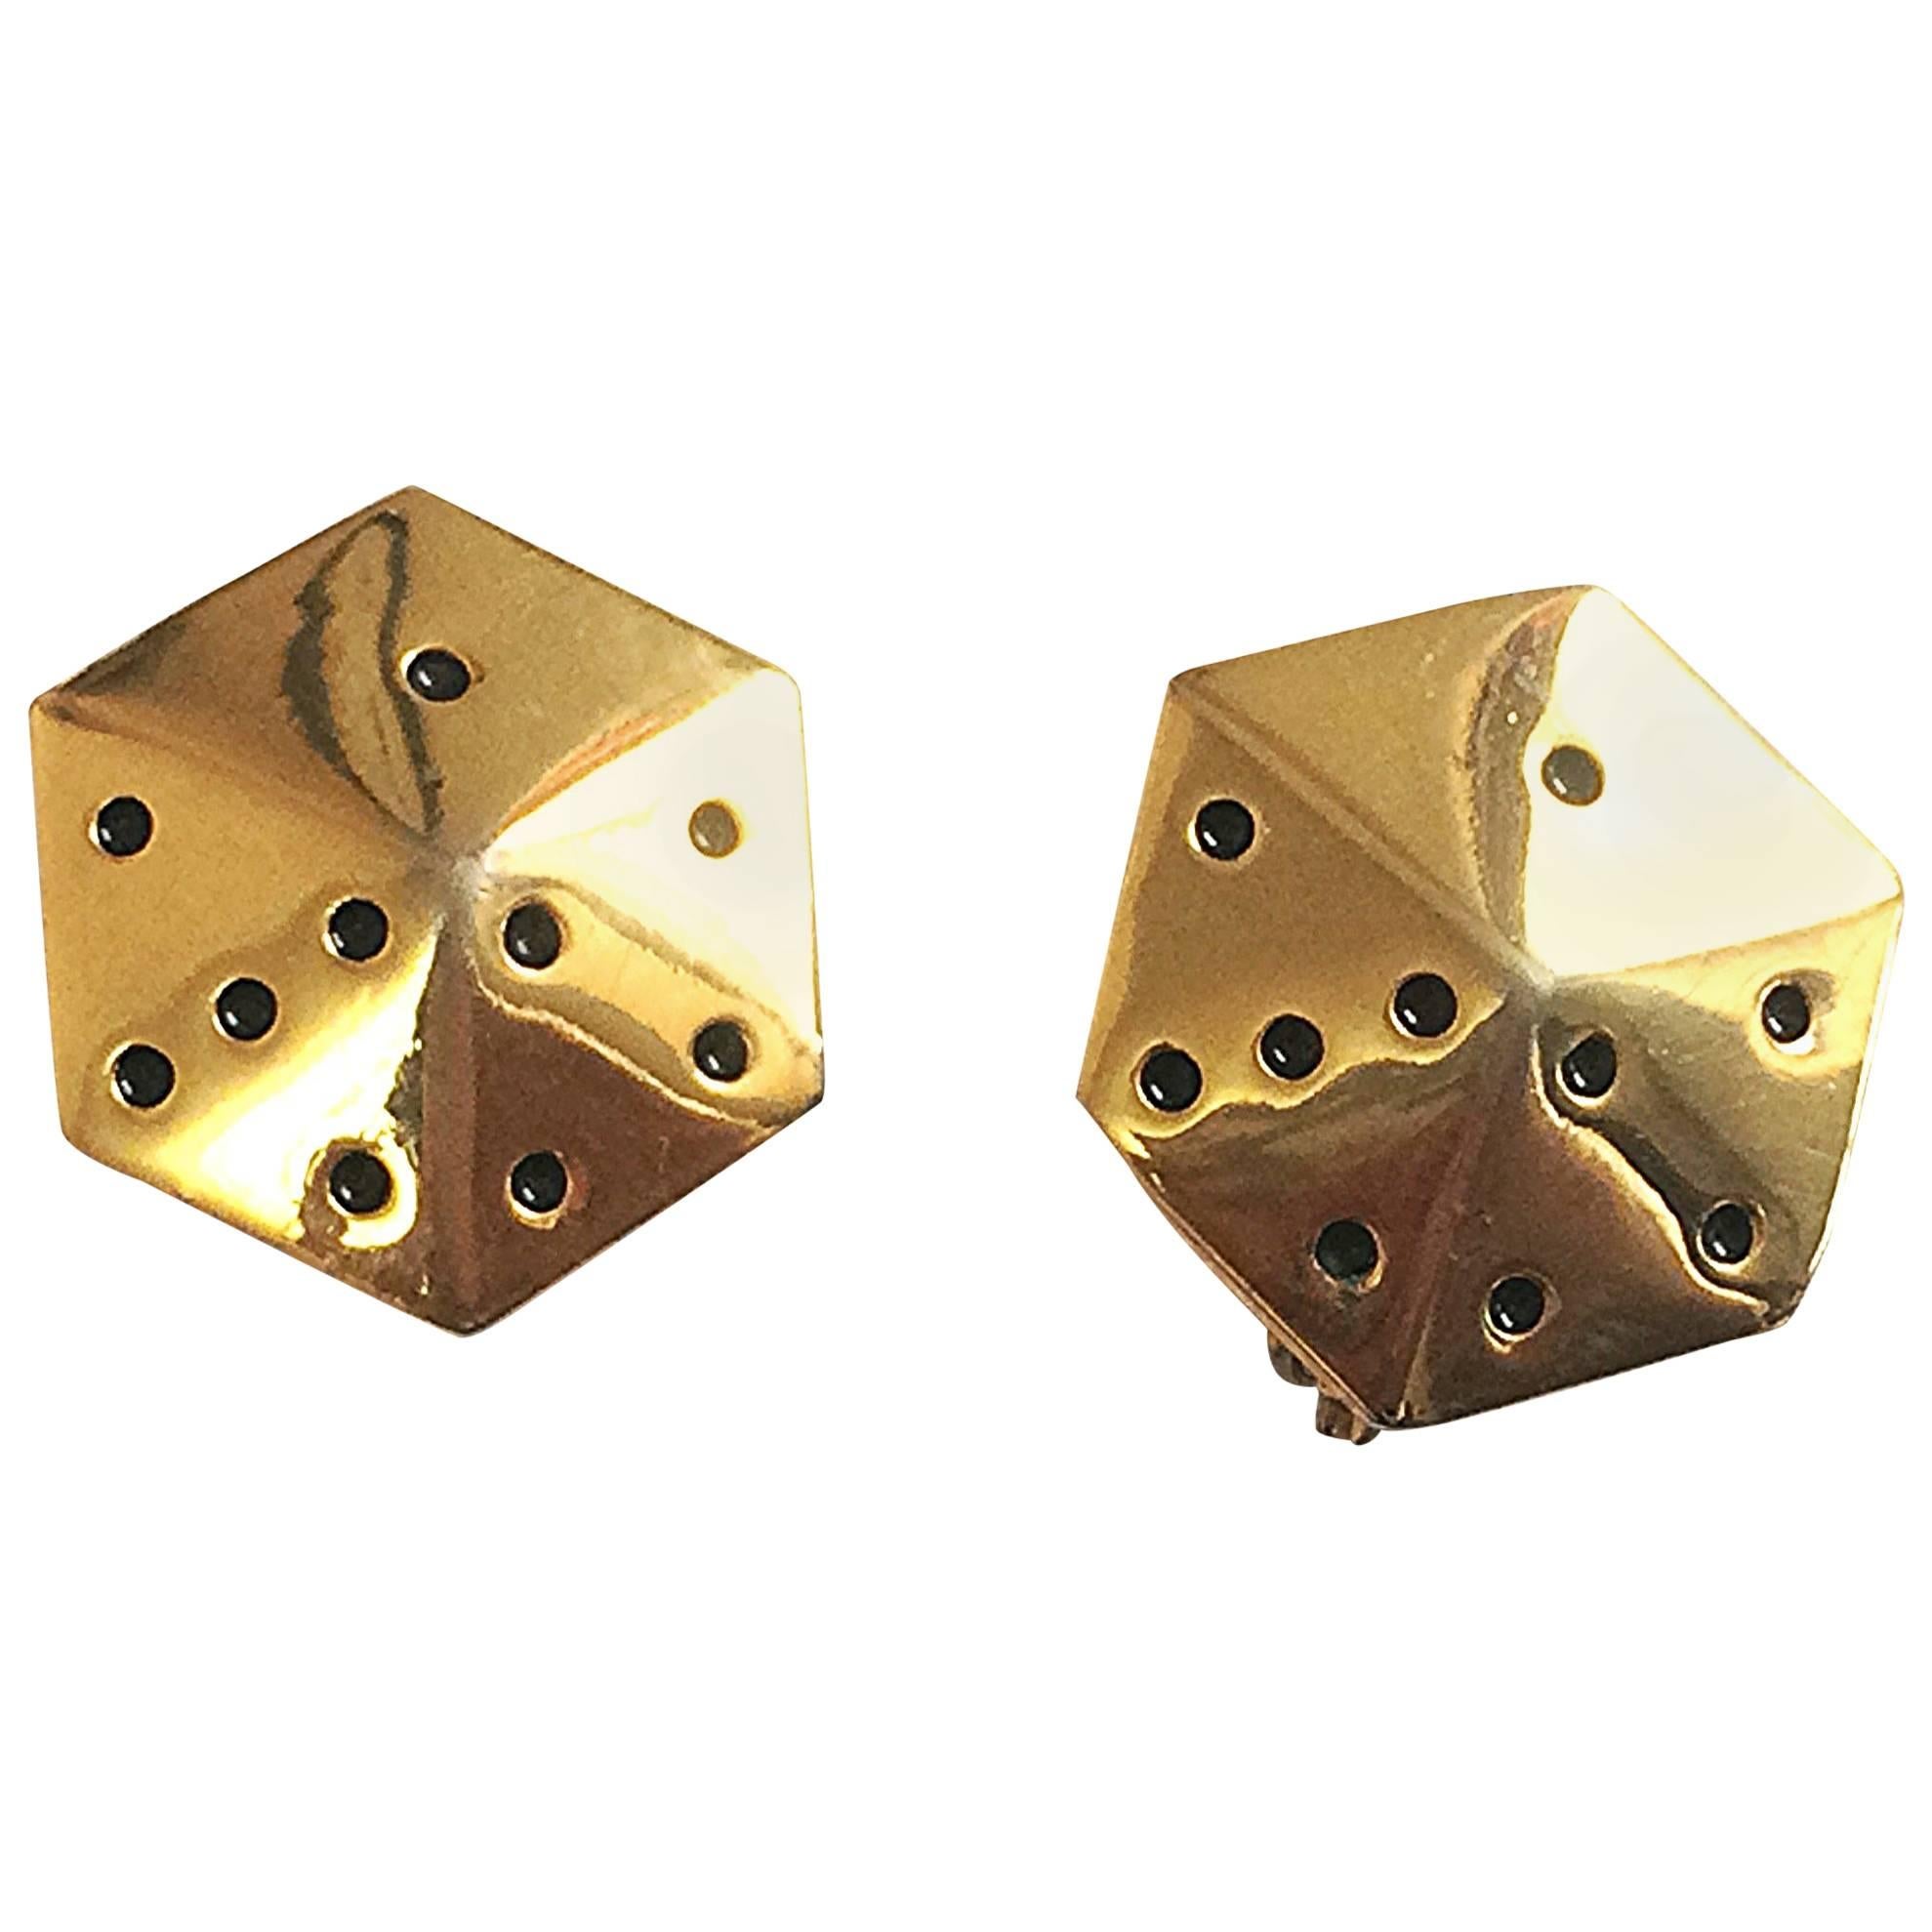 Vintage ESCADA golden dice cube design earrings. Perfect vintage jewelry gift. For Sale